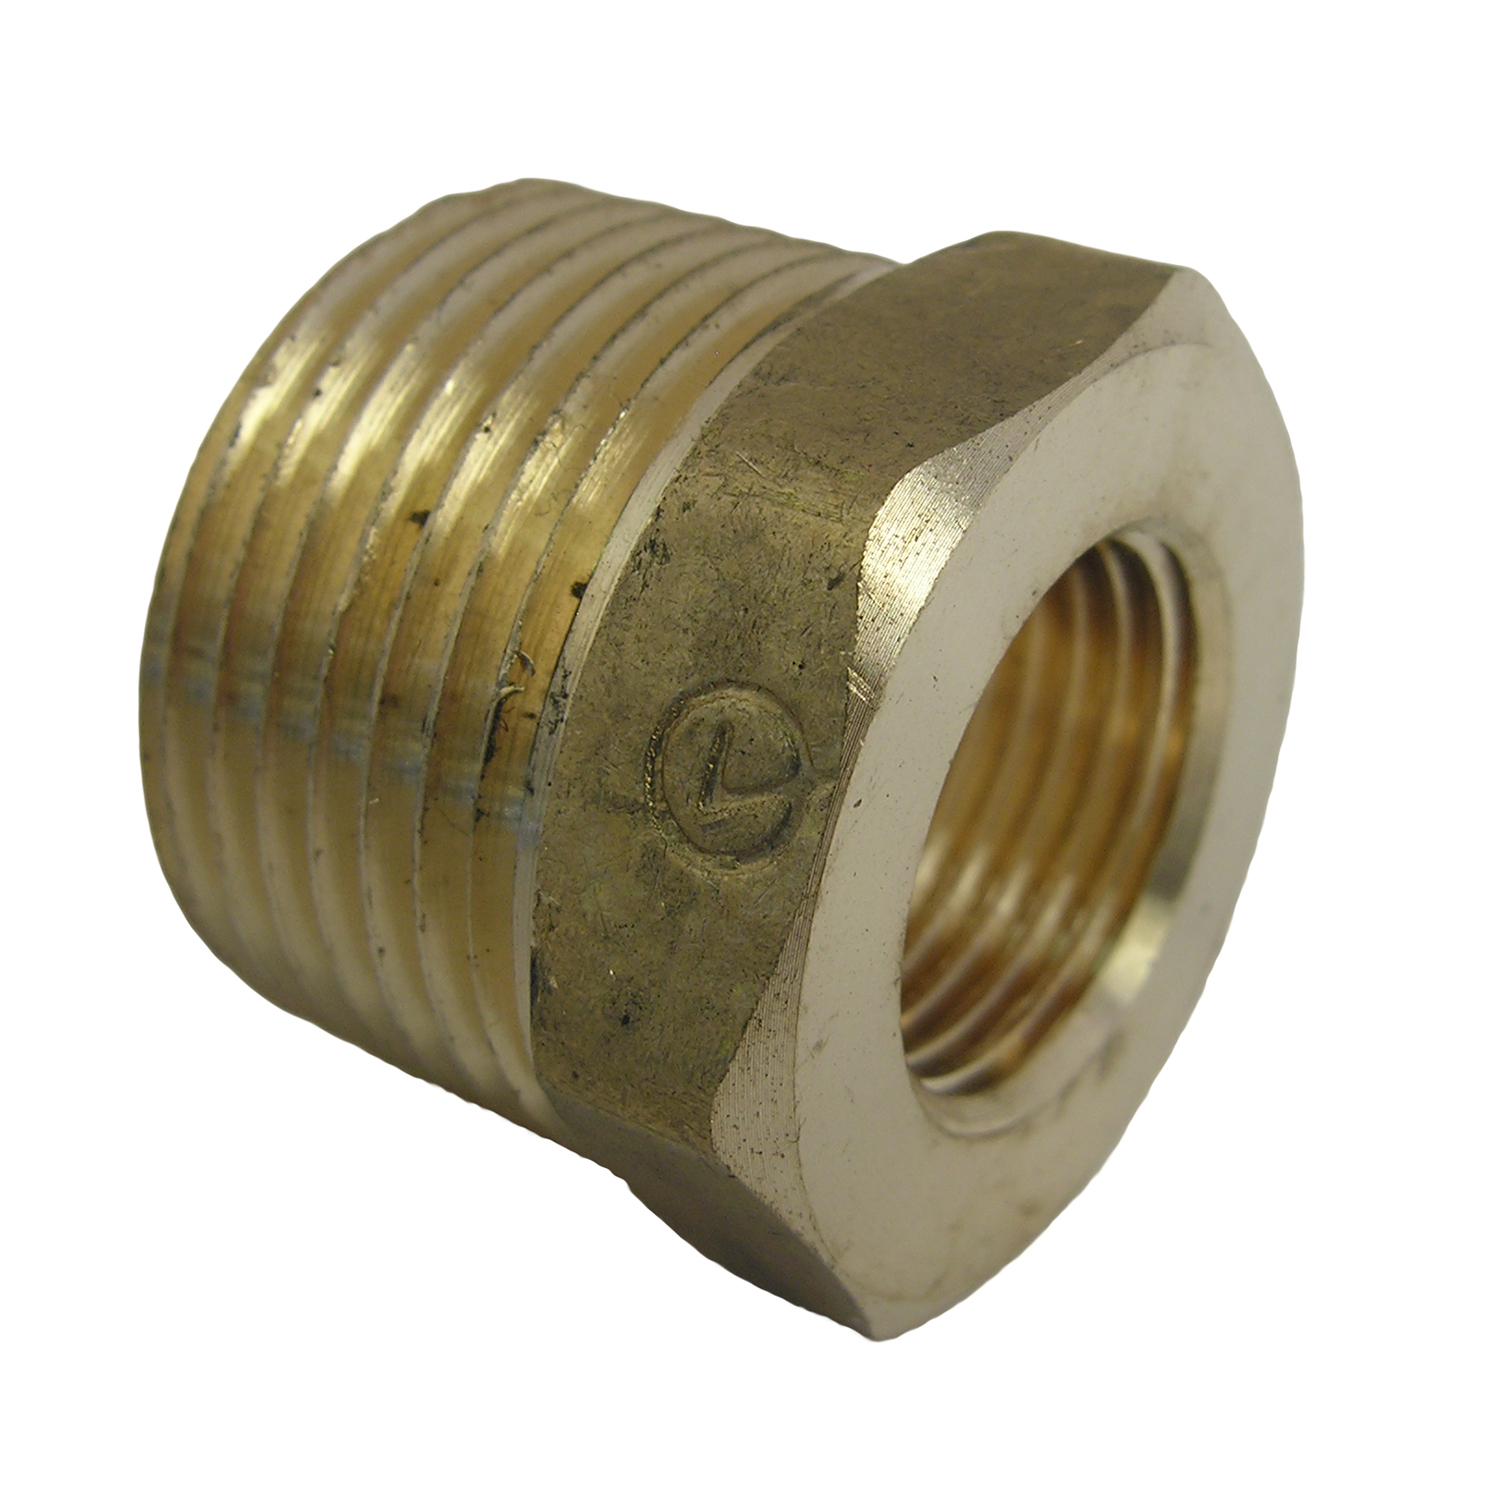 17-9257 Hex Pipe Bushing, 3/4 x 3/8 in, MPT x FPT, Brass, 125 psi Pressure